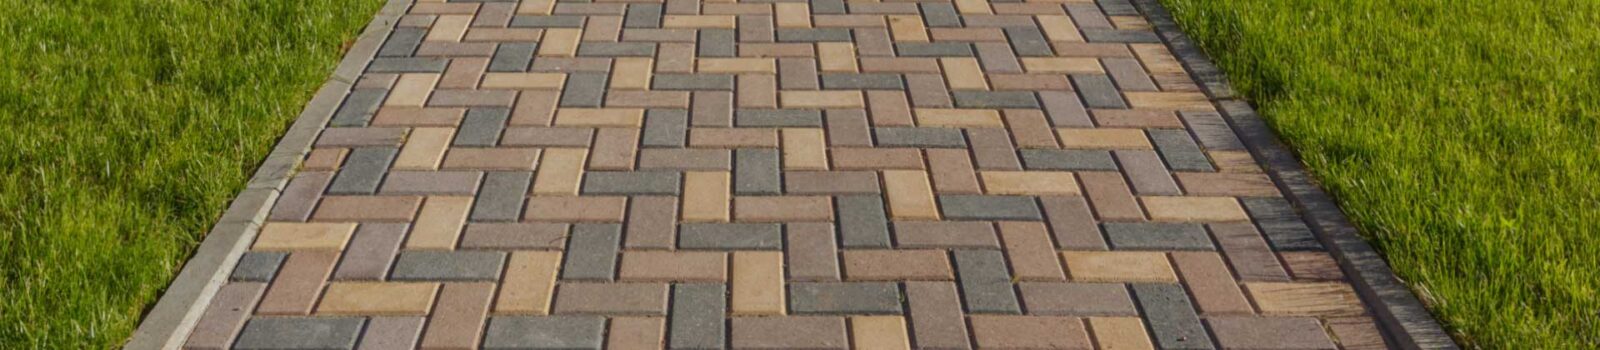 Block Paving Installation - Choose from a wide range of Paving Options